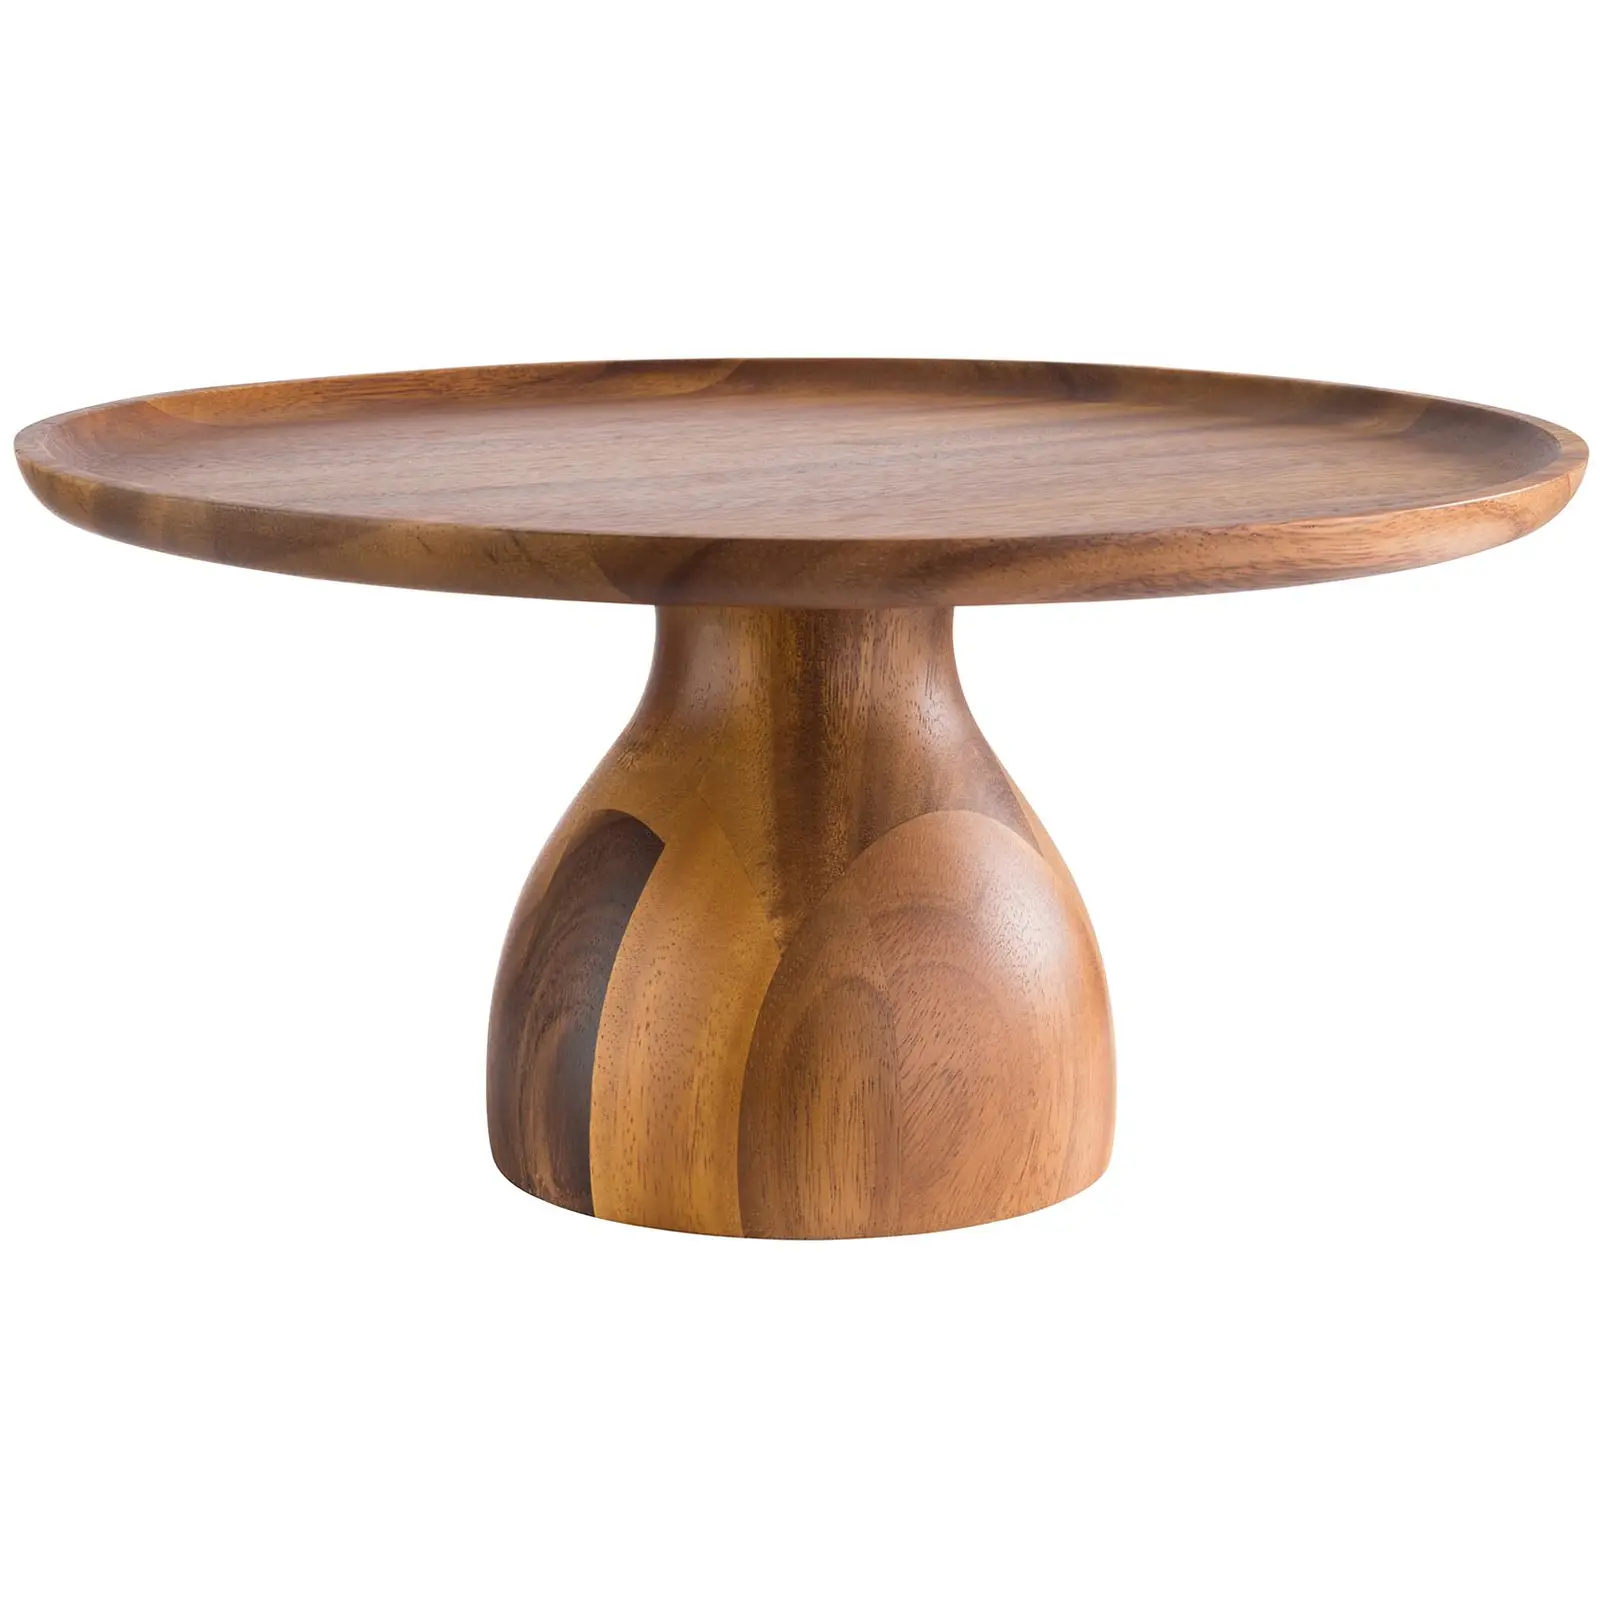 Factory second Cake Plate - Oiled acacia wood -  diameter: 33 cm - height: 16 cm